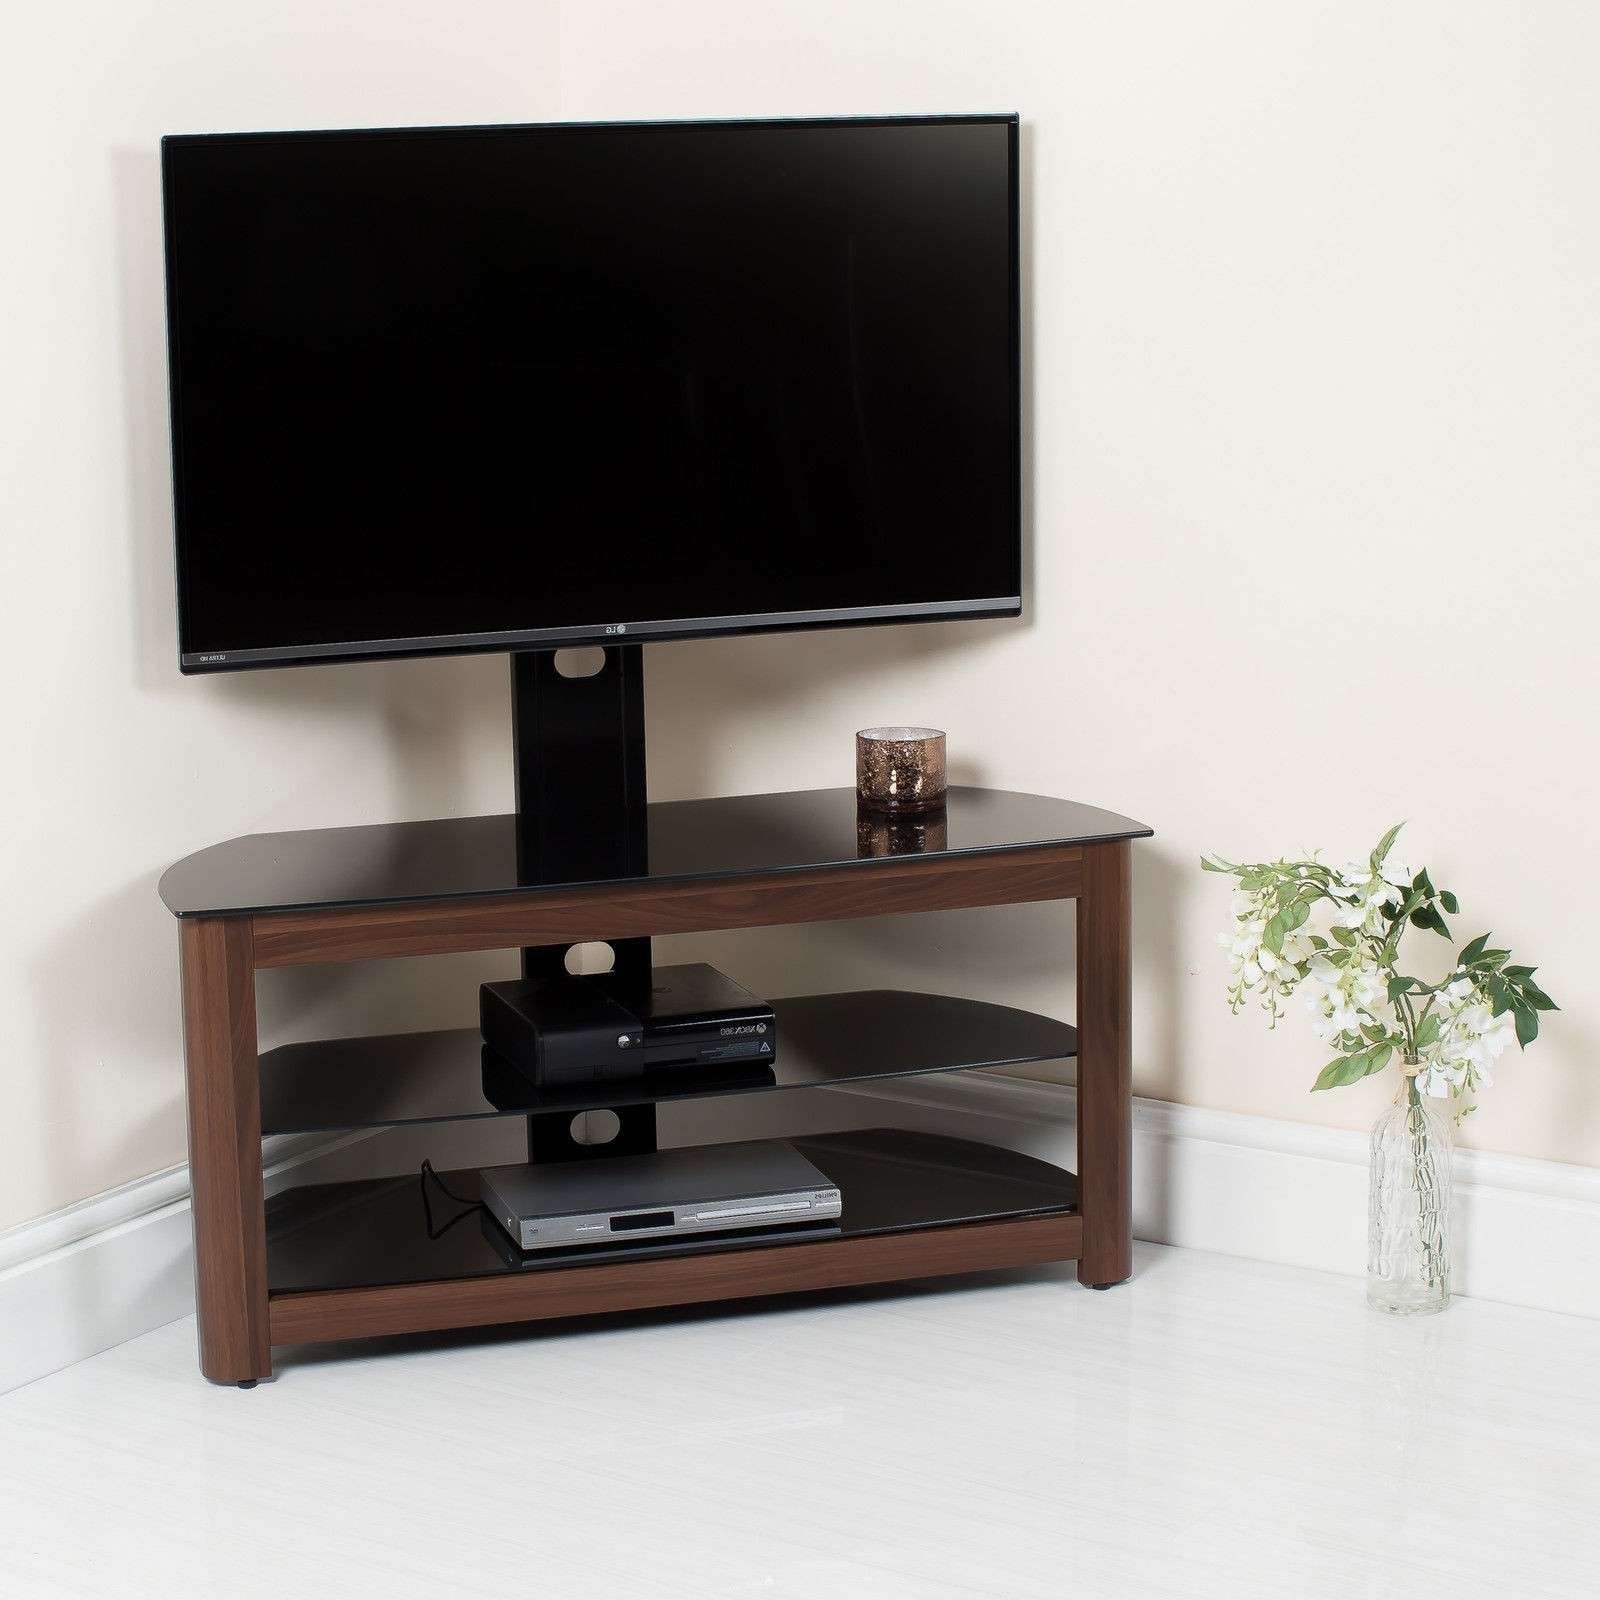 Walnut High Gloss Tv Stand With Swivel Bracket Abreo Home Furniture Pertaining To Walnut Tv Stands (View 4 of 15)